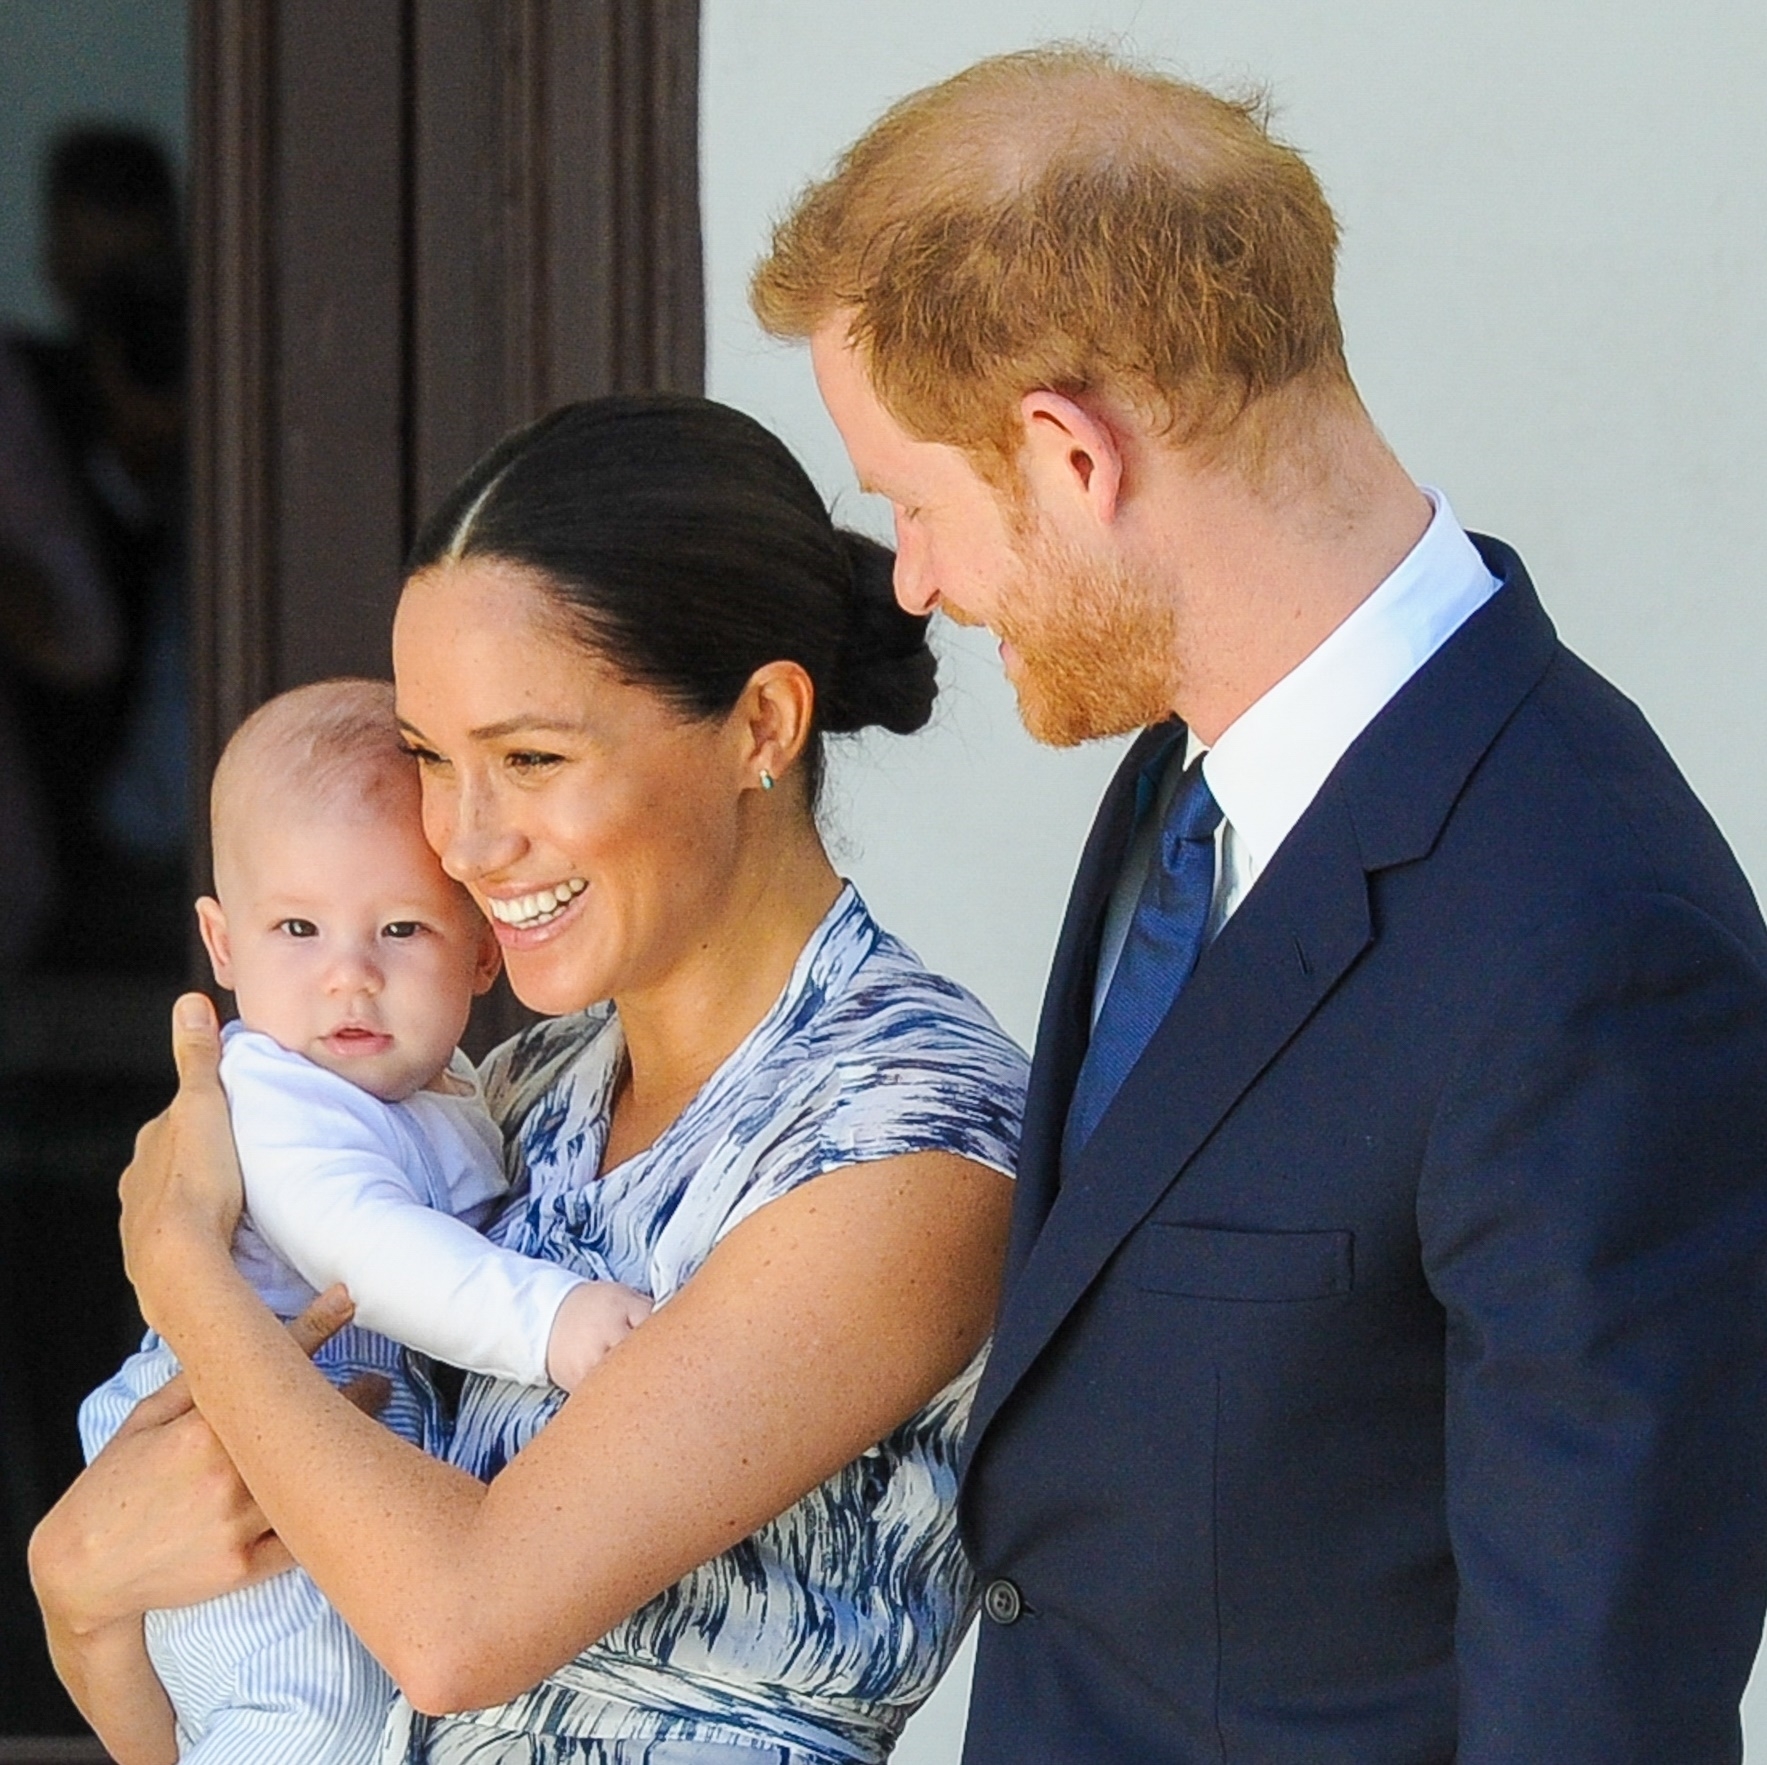 London, UK  - The Prince Harry office has confirmed that he and his family will be spending 